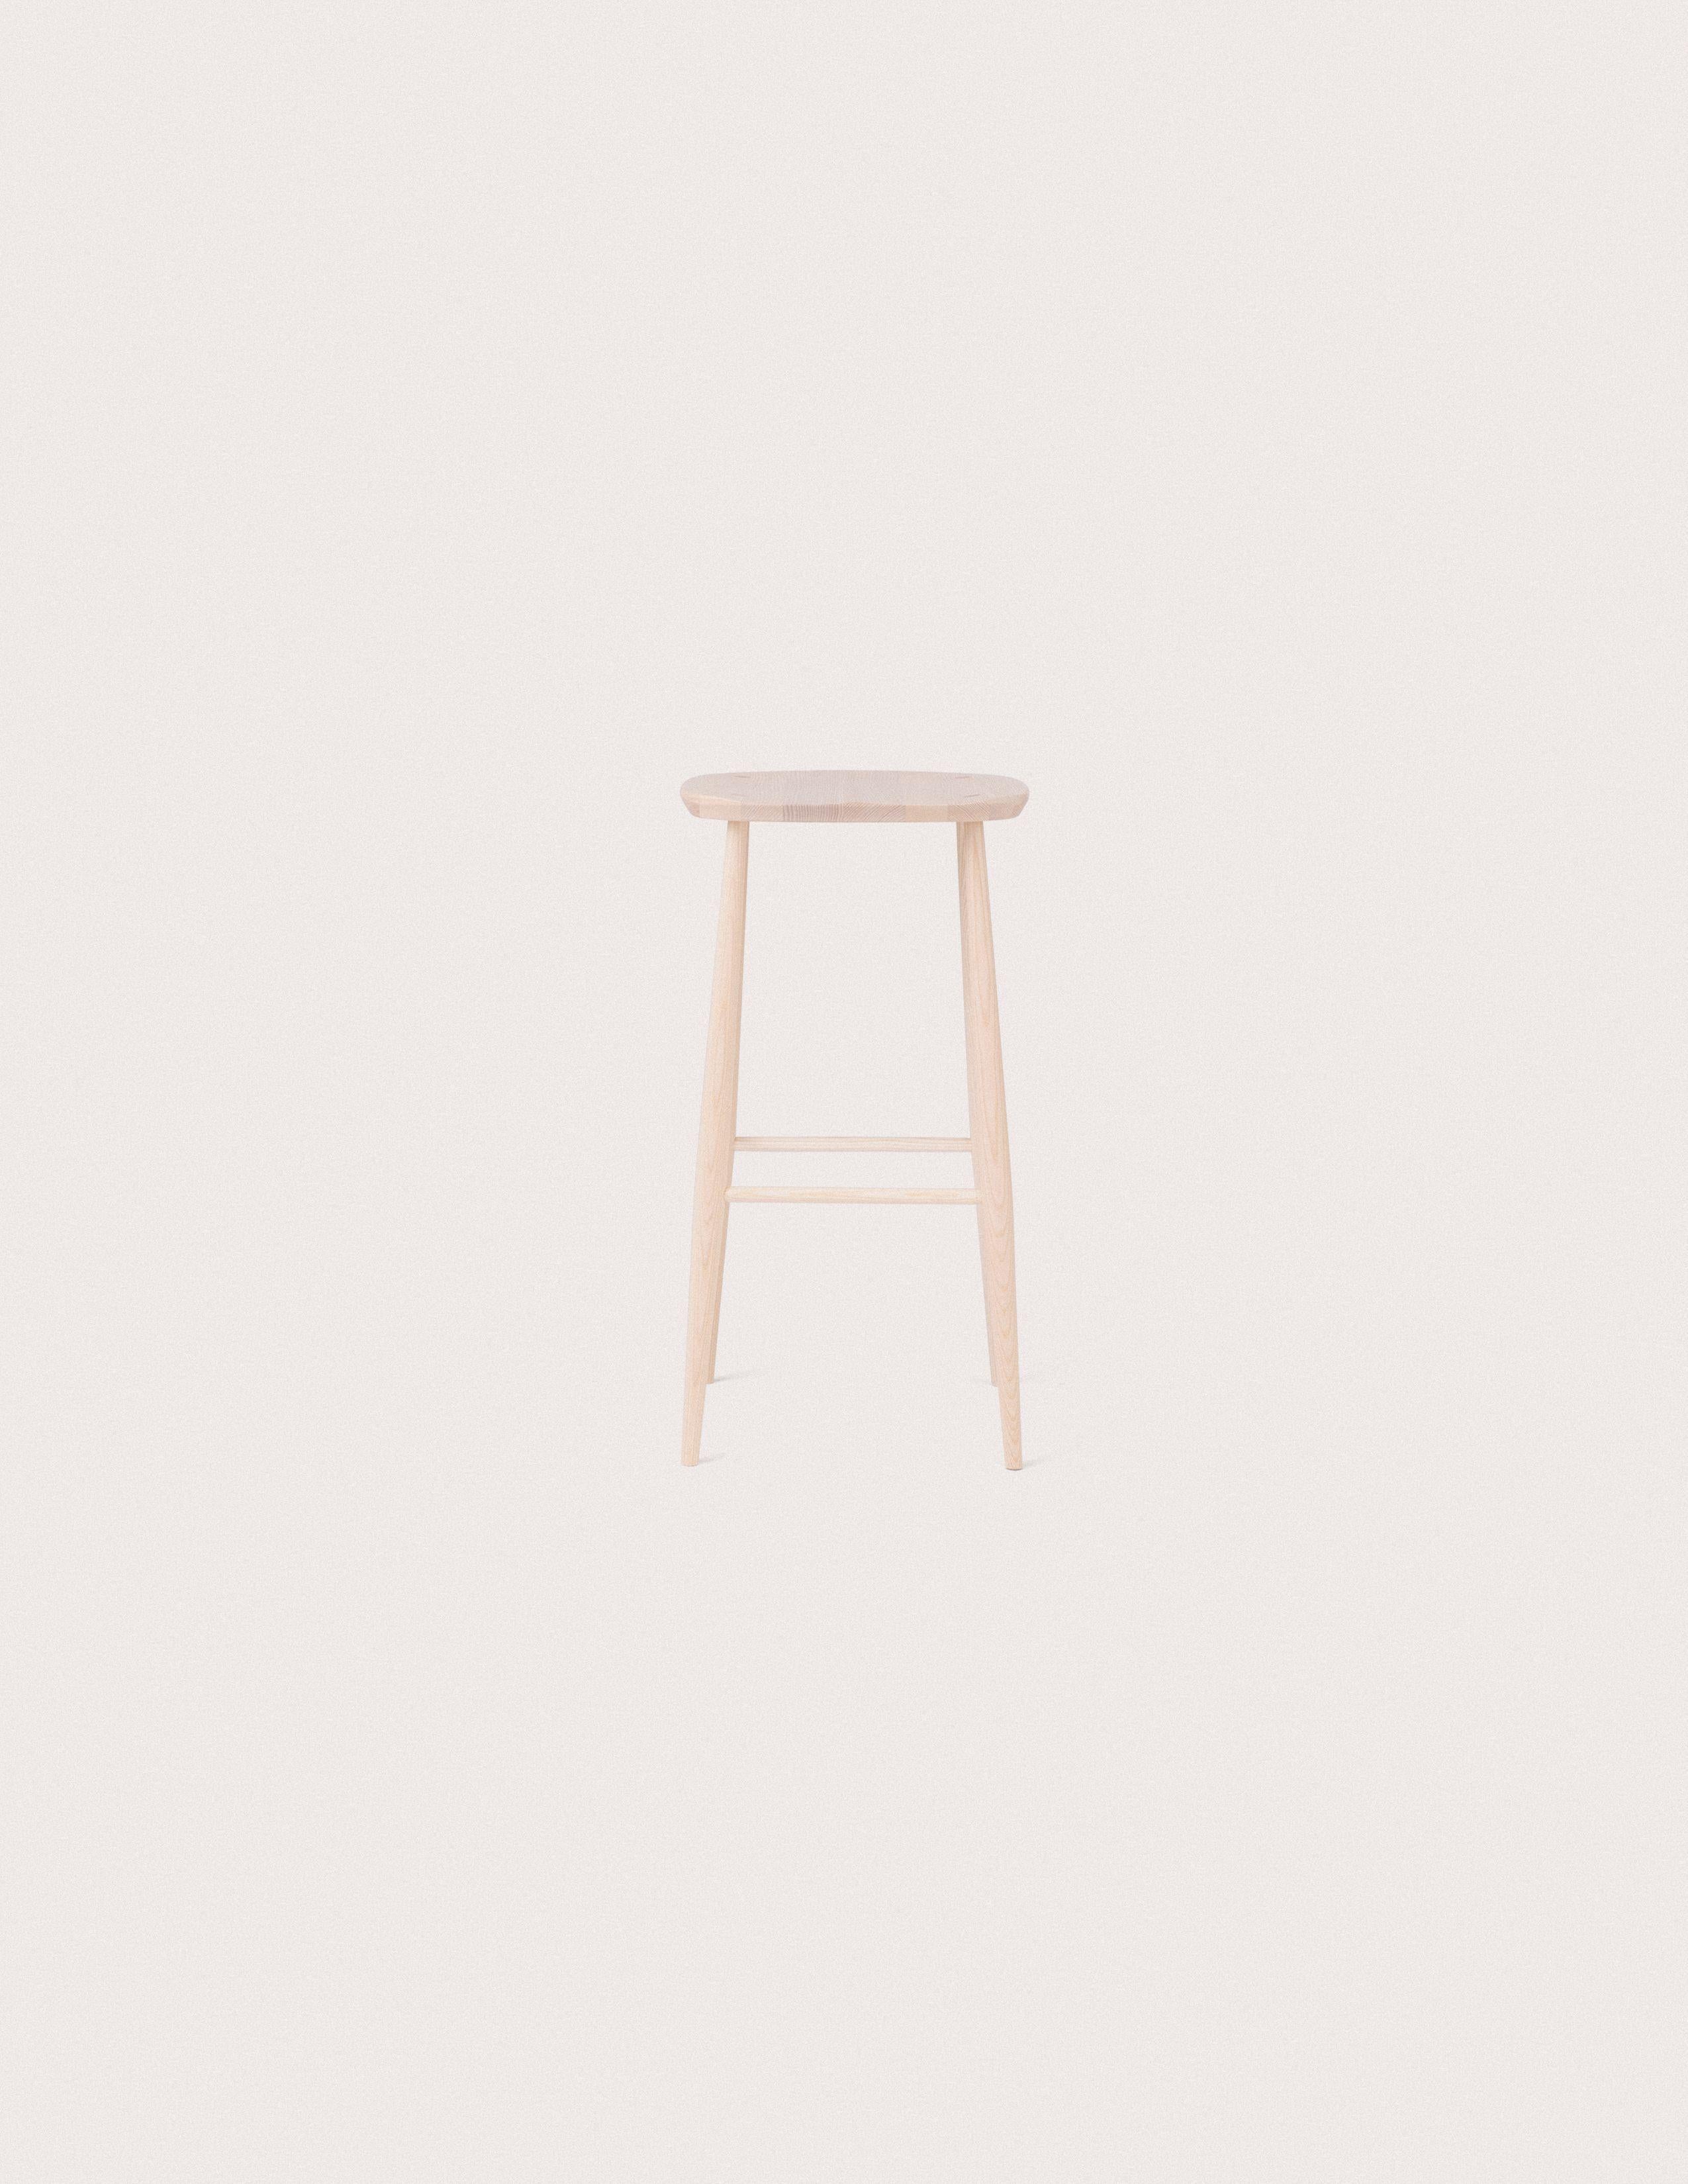 Product Dimensions
Width: 39cm
Depth: 37cm
Height: 75cm
Seat Height: 75cm
Seat Depth: 37cm.

Product Weight
5kg

Assembly
Fully Assembled
The UTILITY BAR STOOL (1956) was originally custom-built as seating for L.Ercolani’s team of